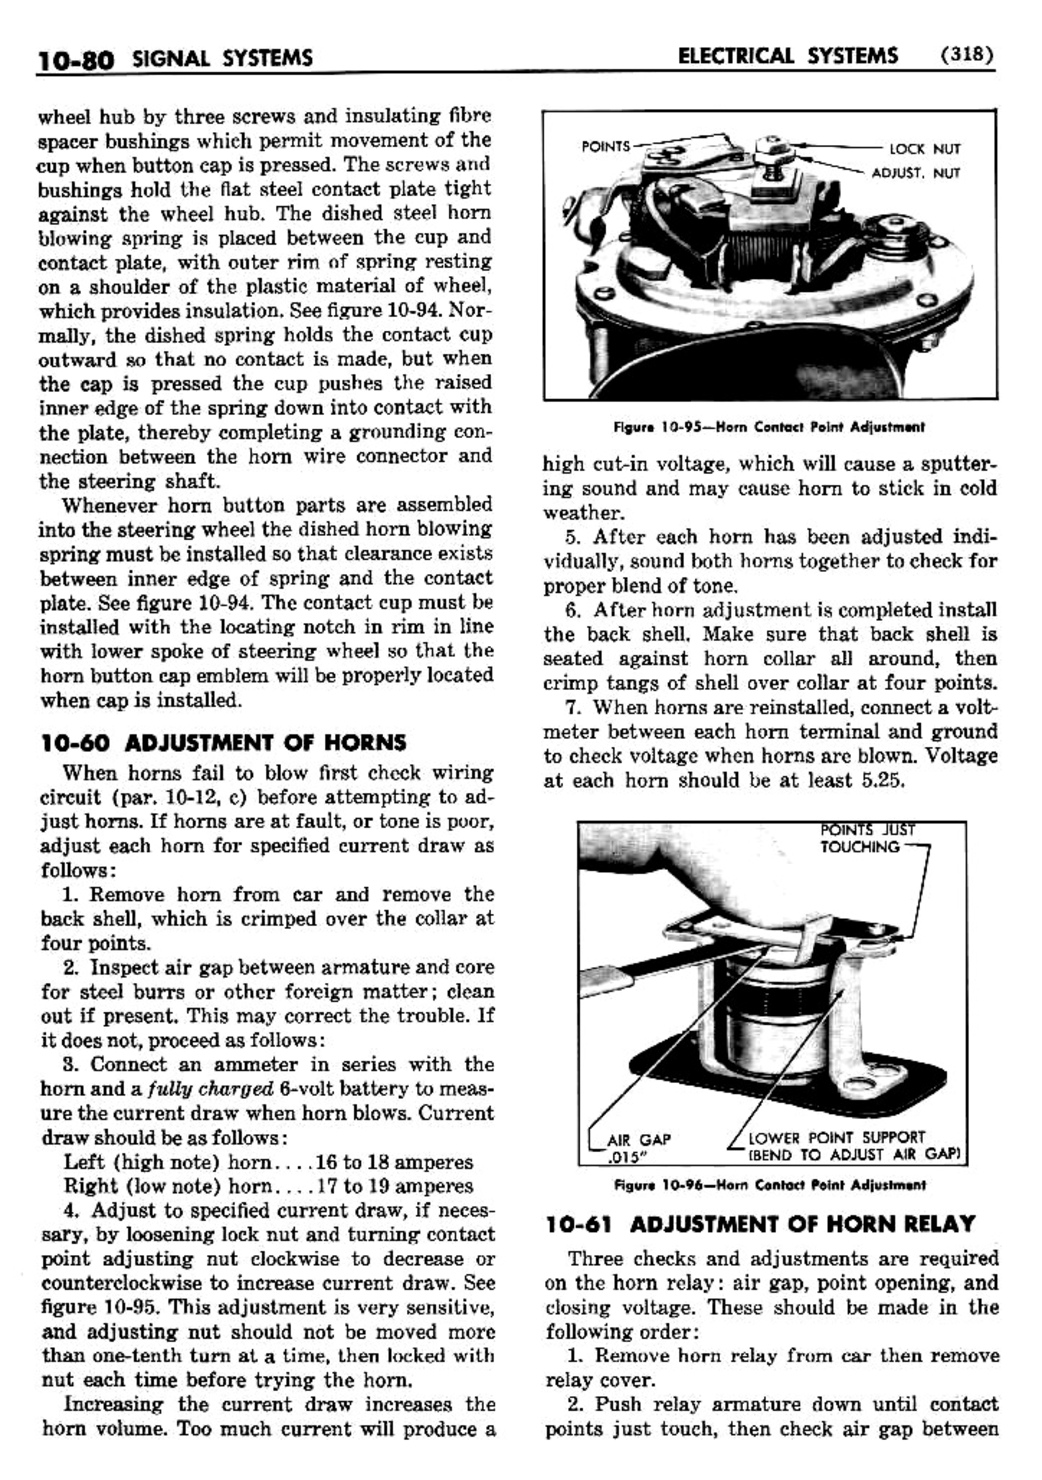 n_11 1950 Buick Shop Manual - Electrical Systems-080-080.jpg